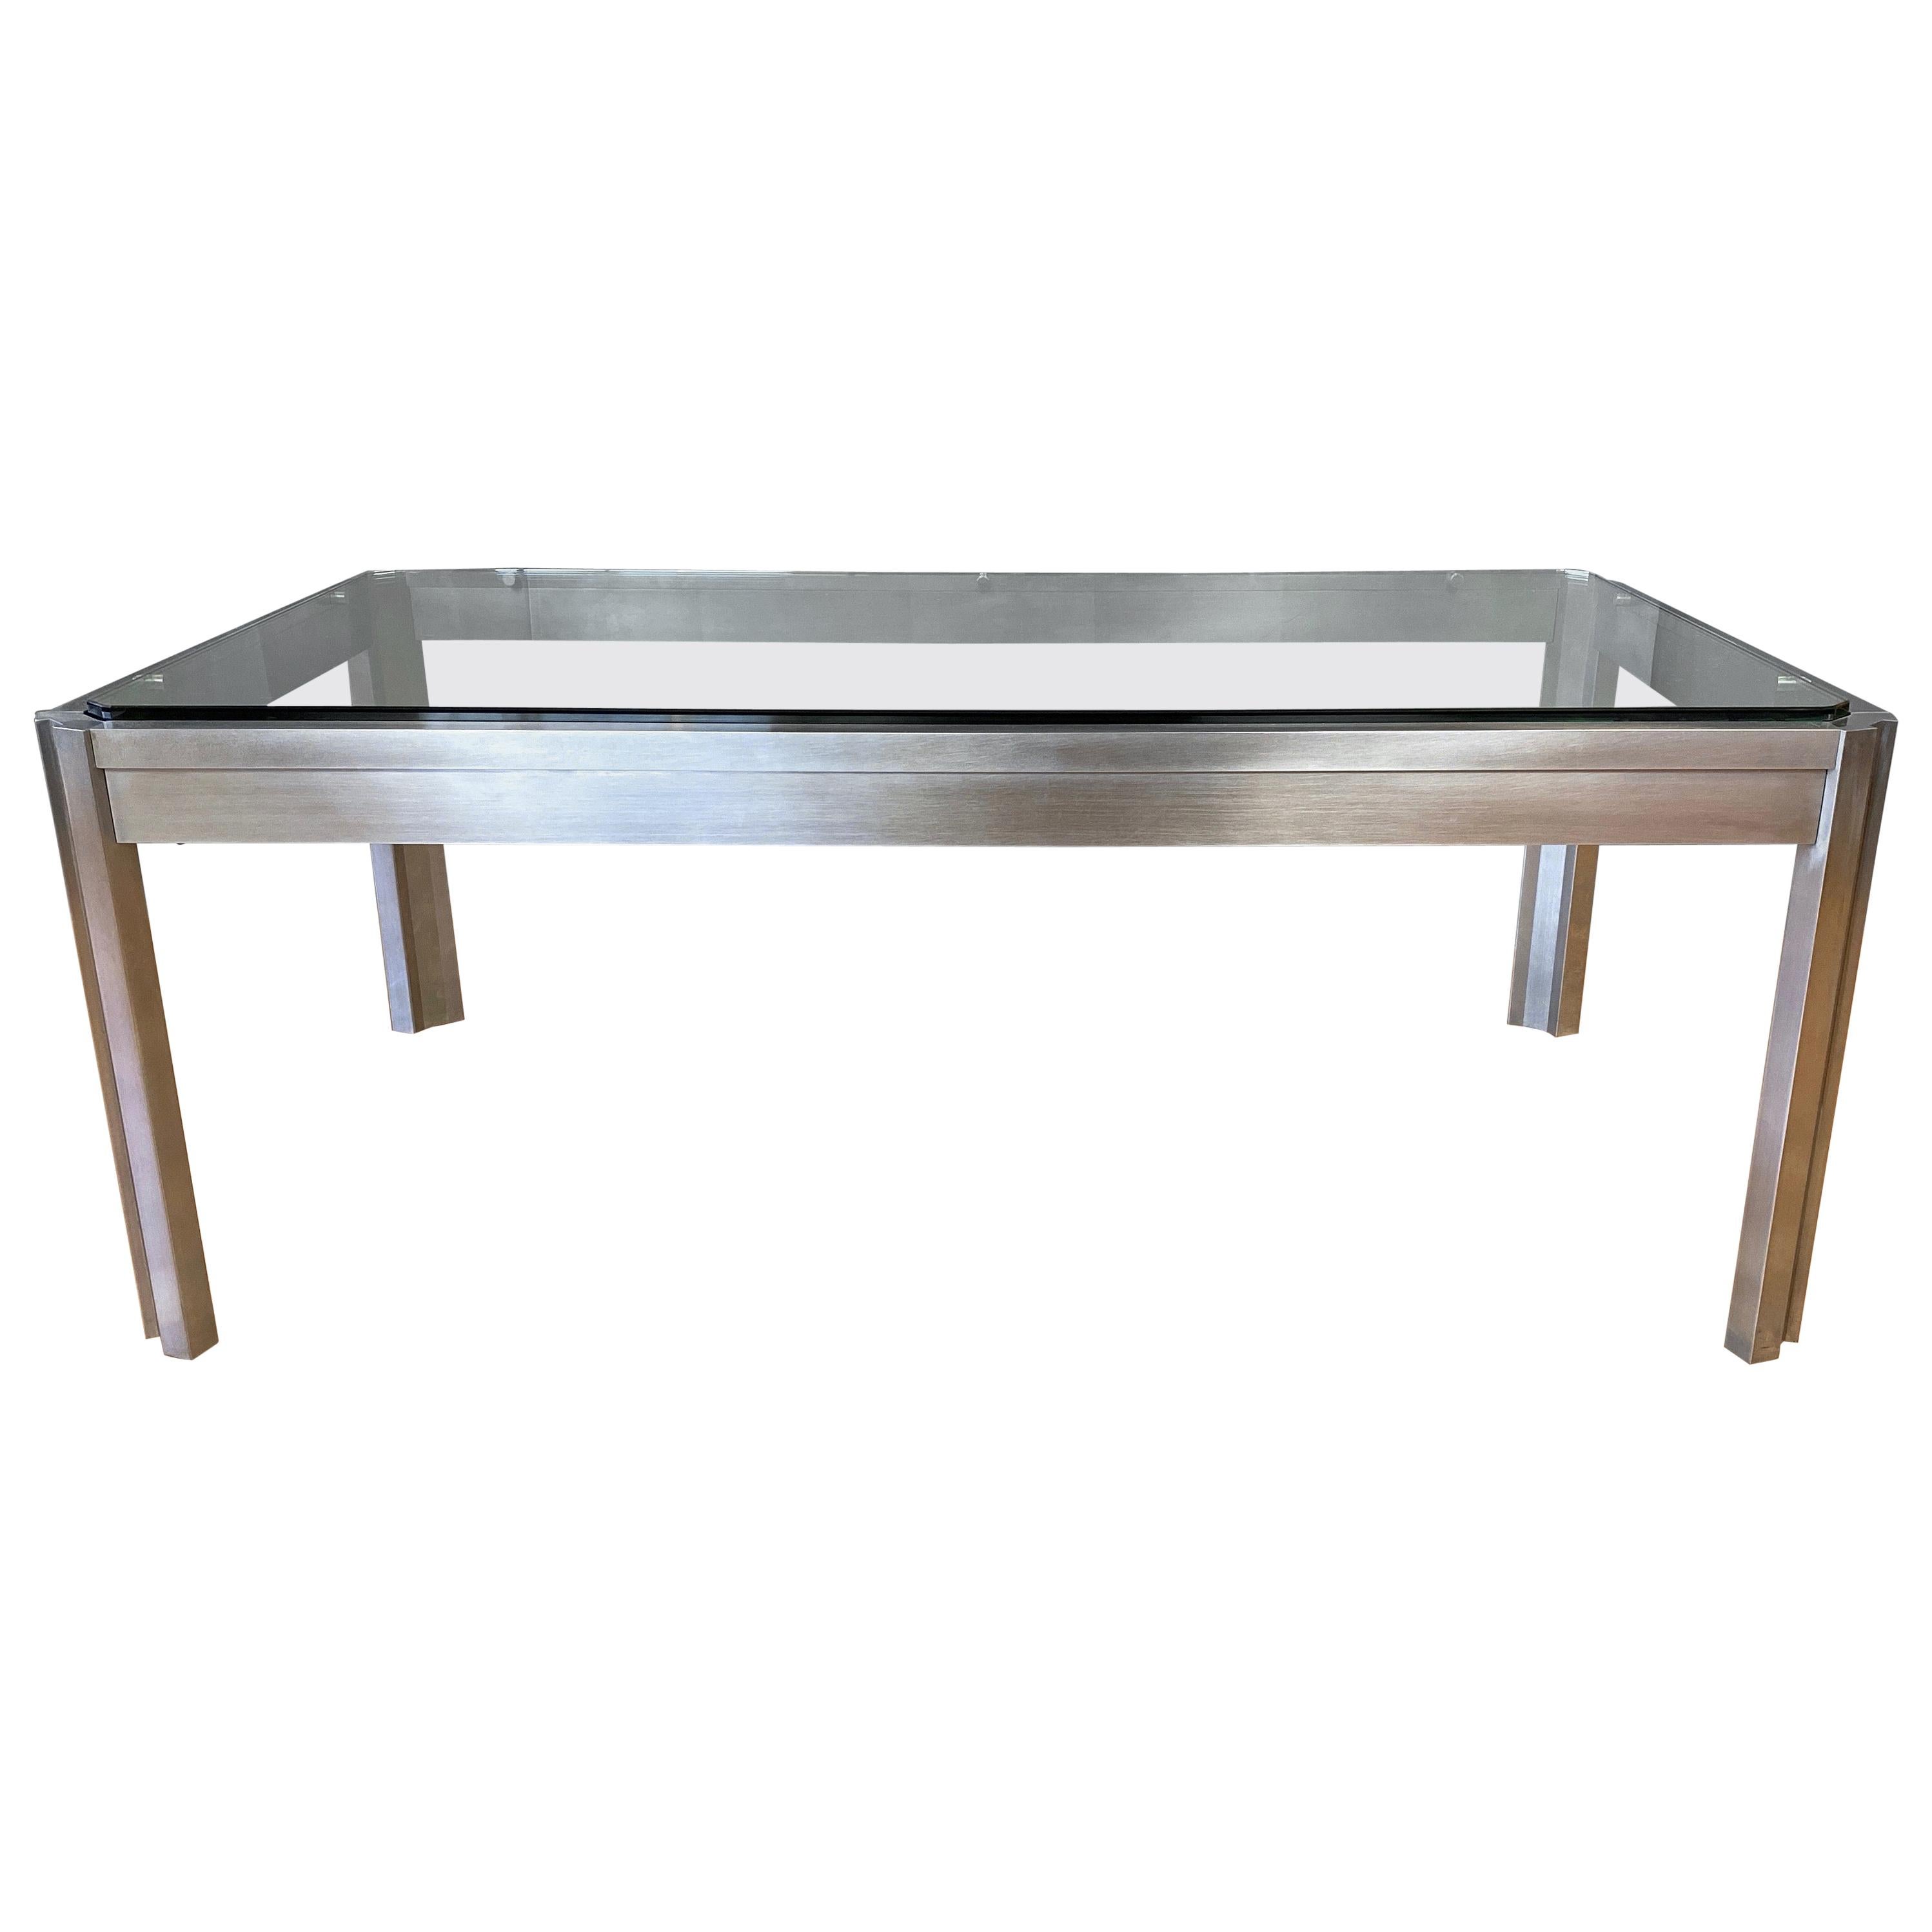 Impressive Custom Fabricated Stainless Steel and Glass Coffee Table, 1970s